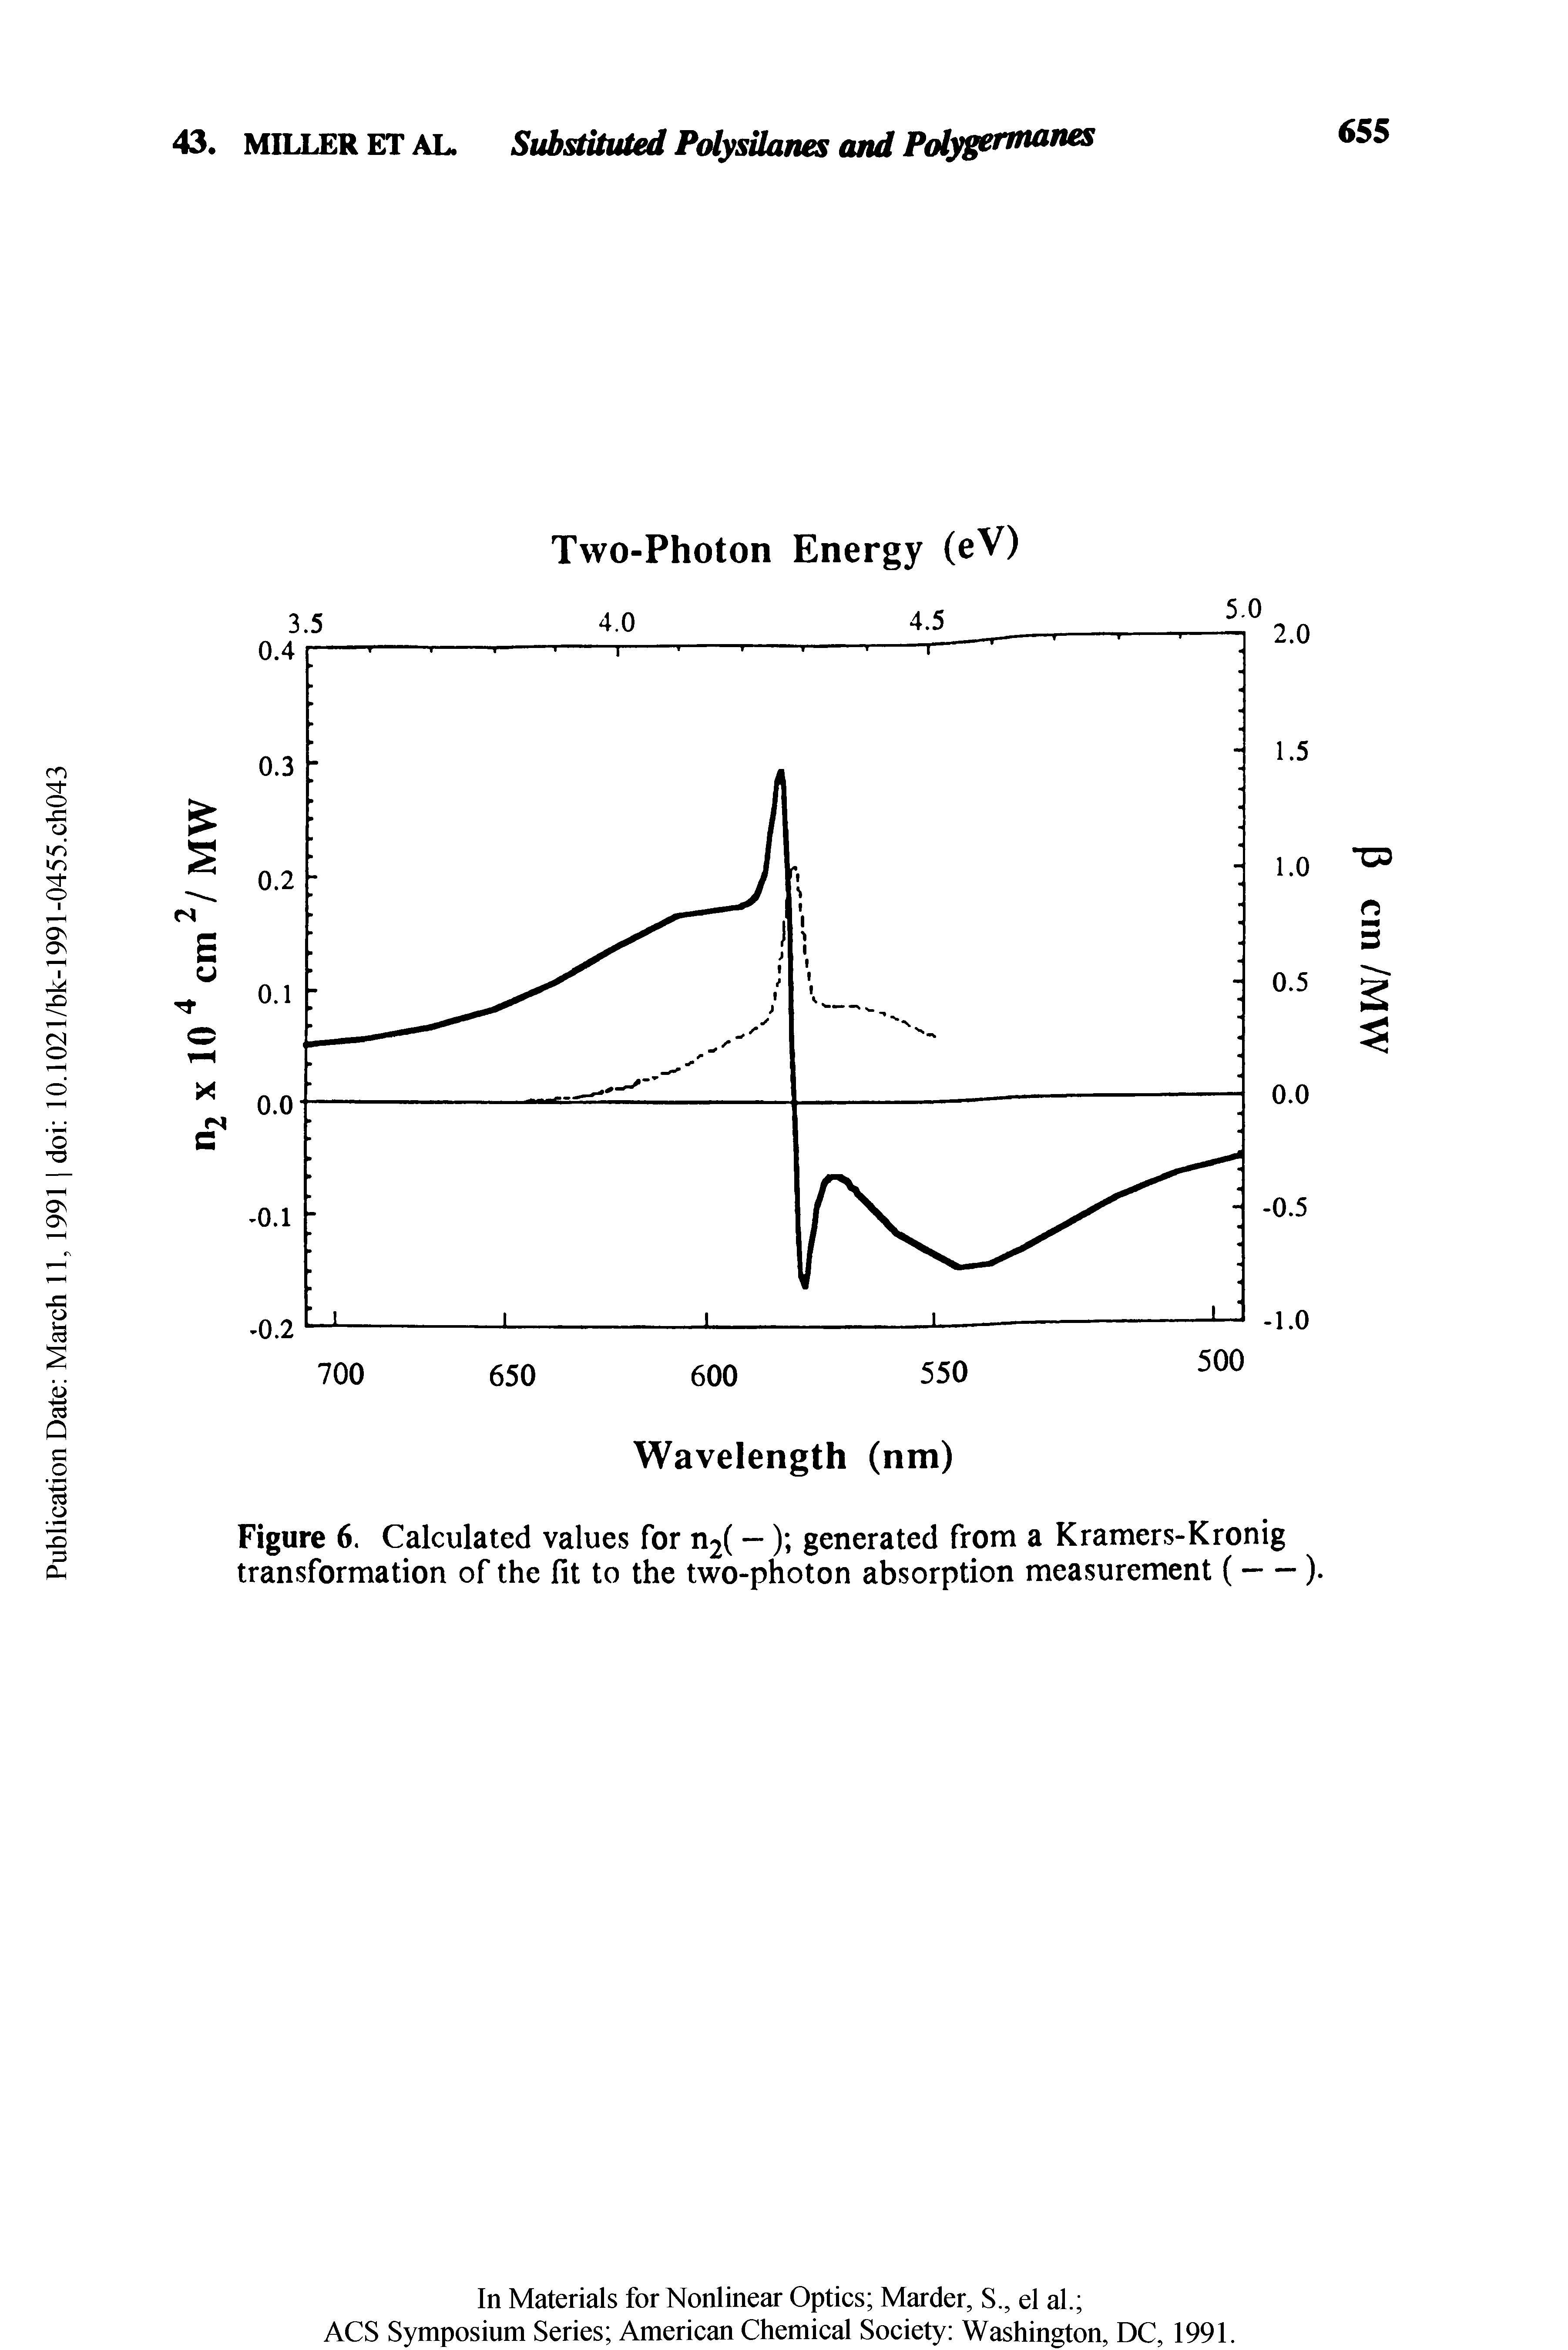 Figure 6. Calculated values for n2( —) generated from a Kramers-Kronig transformation of the fit to the two-photon absorption measurement (-).